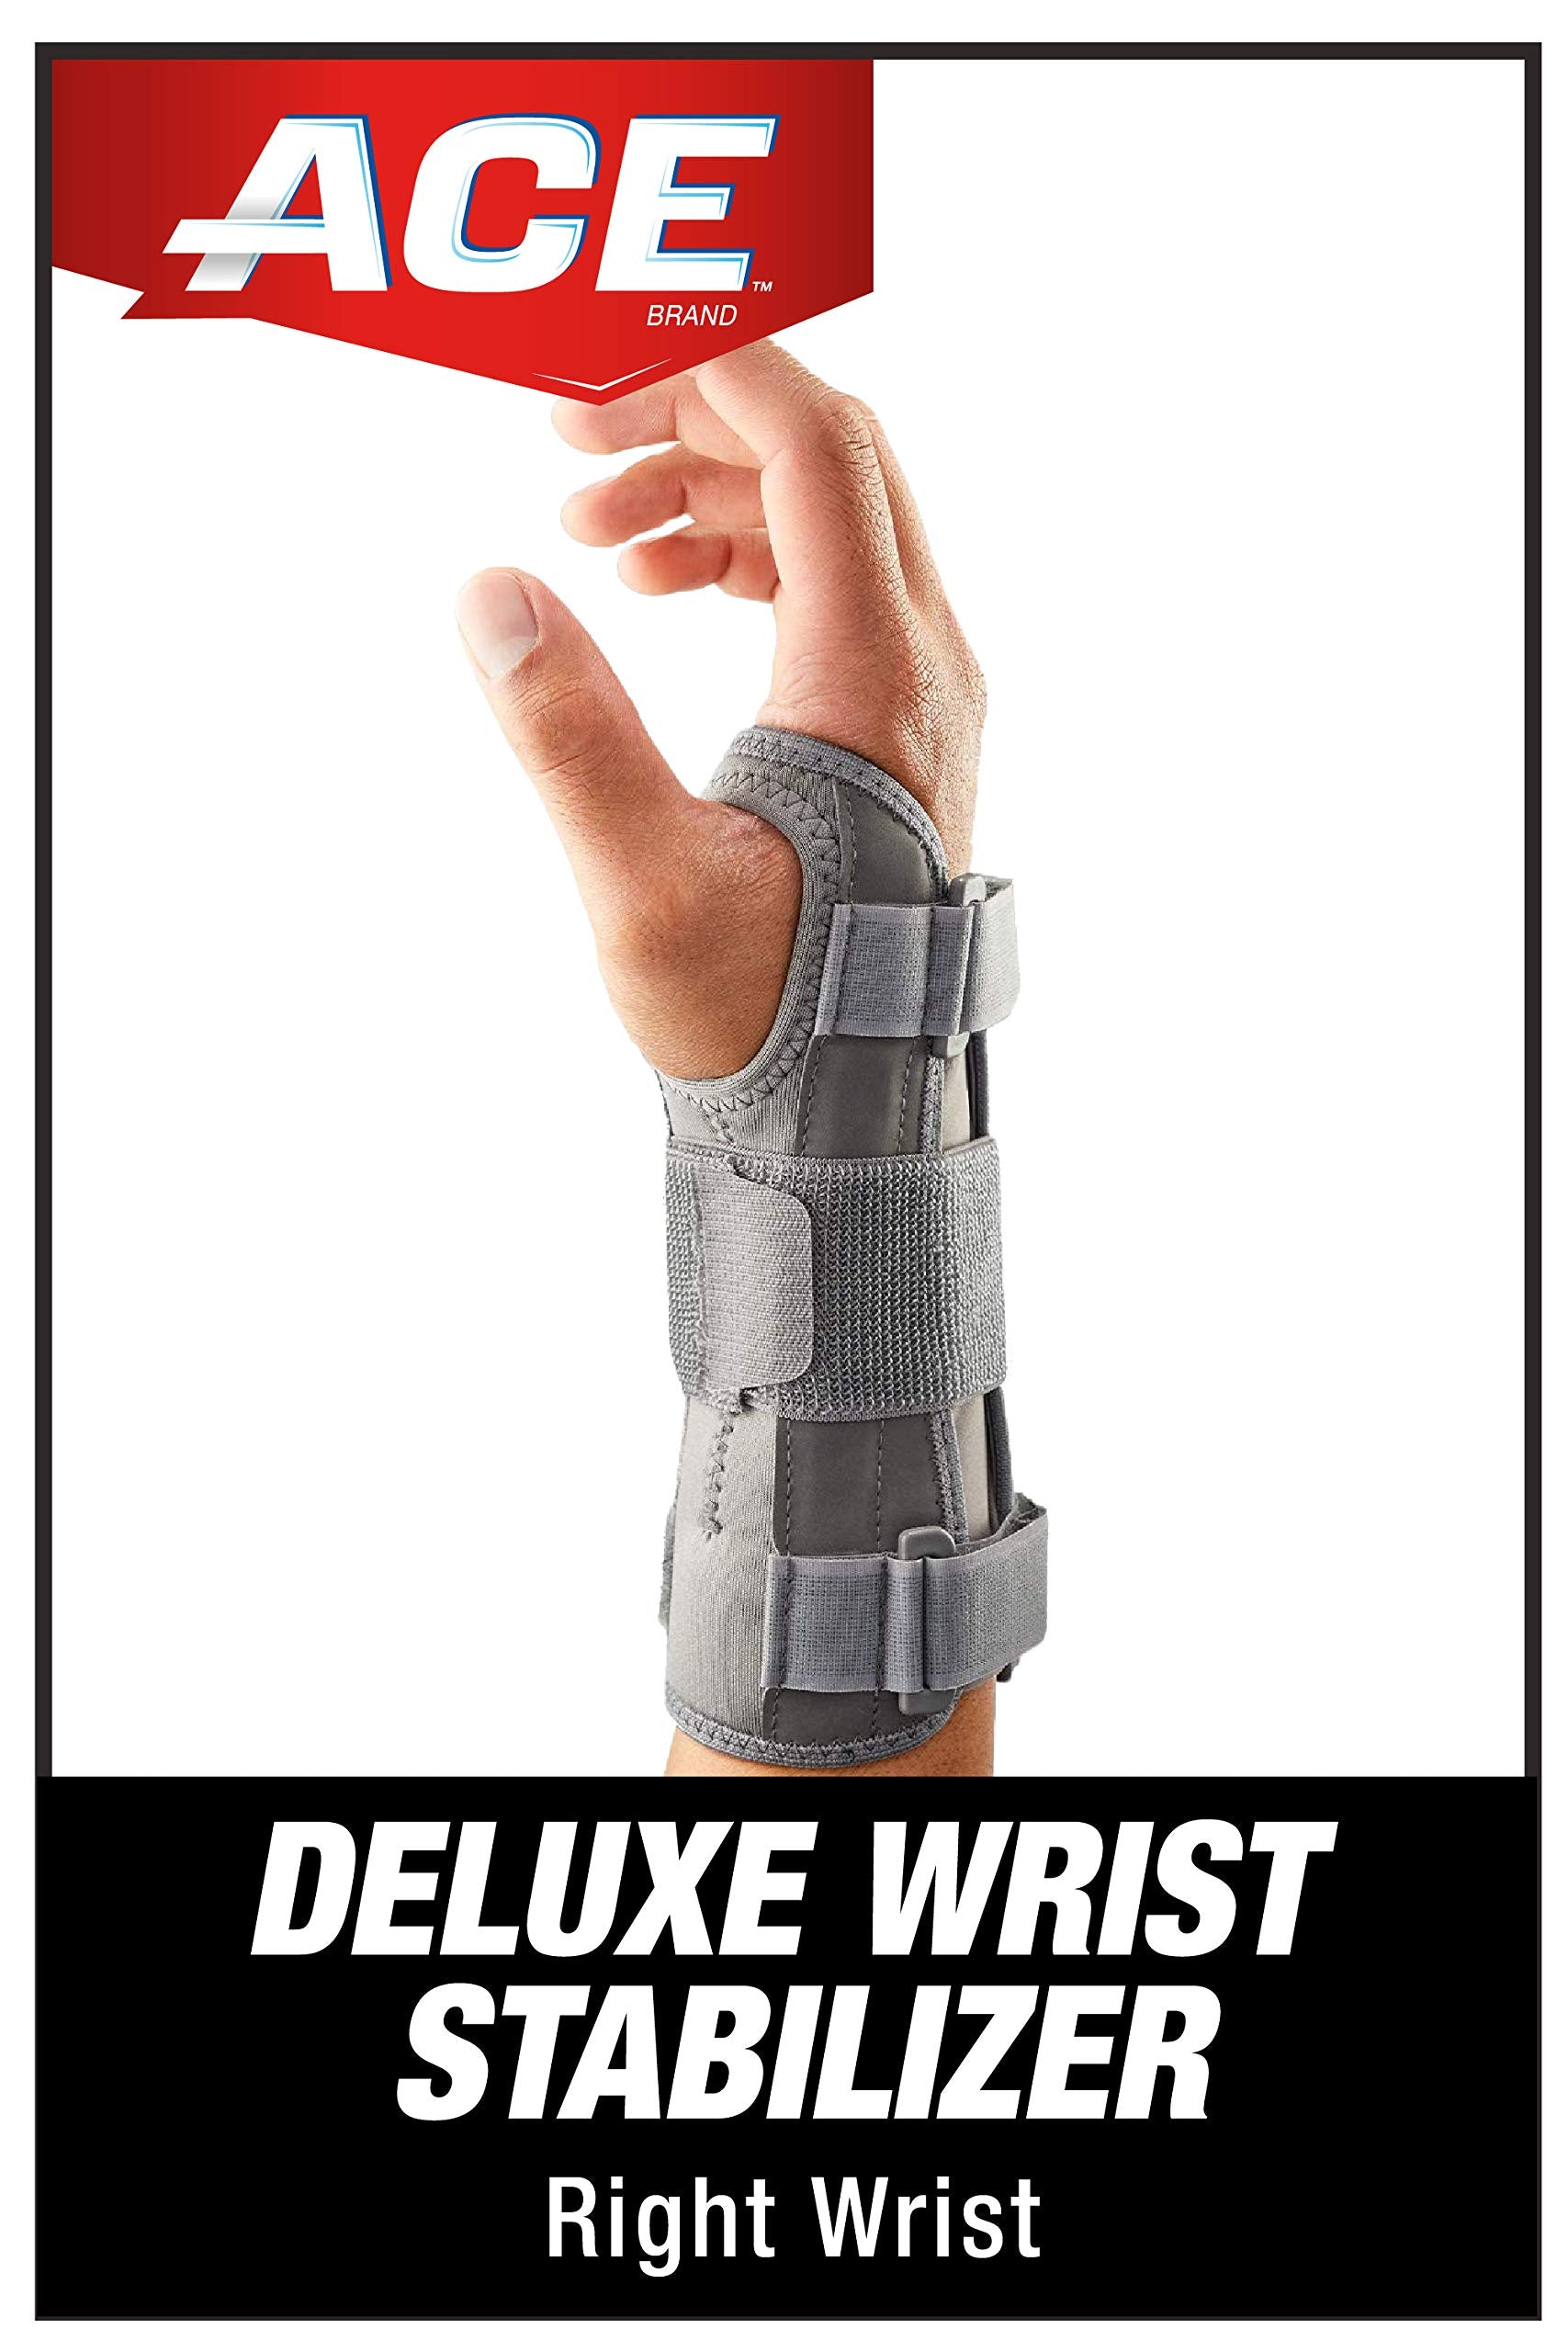 ACE Deluxe Wrist Stabilizer, Right Hand, Helps Relieve Symptoms of Carpal Tunnel Syndrome, Adjustable, Stabilizing, Firm Support